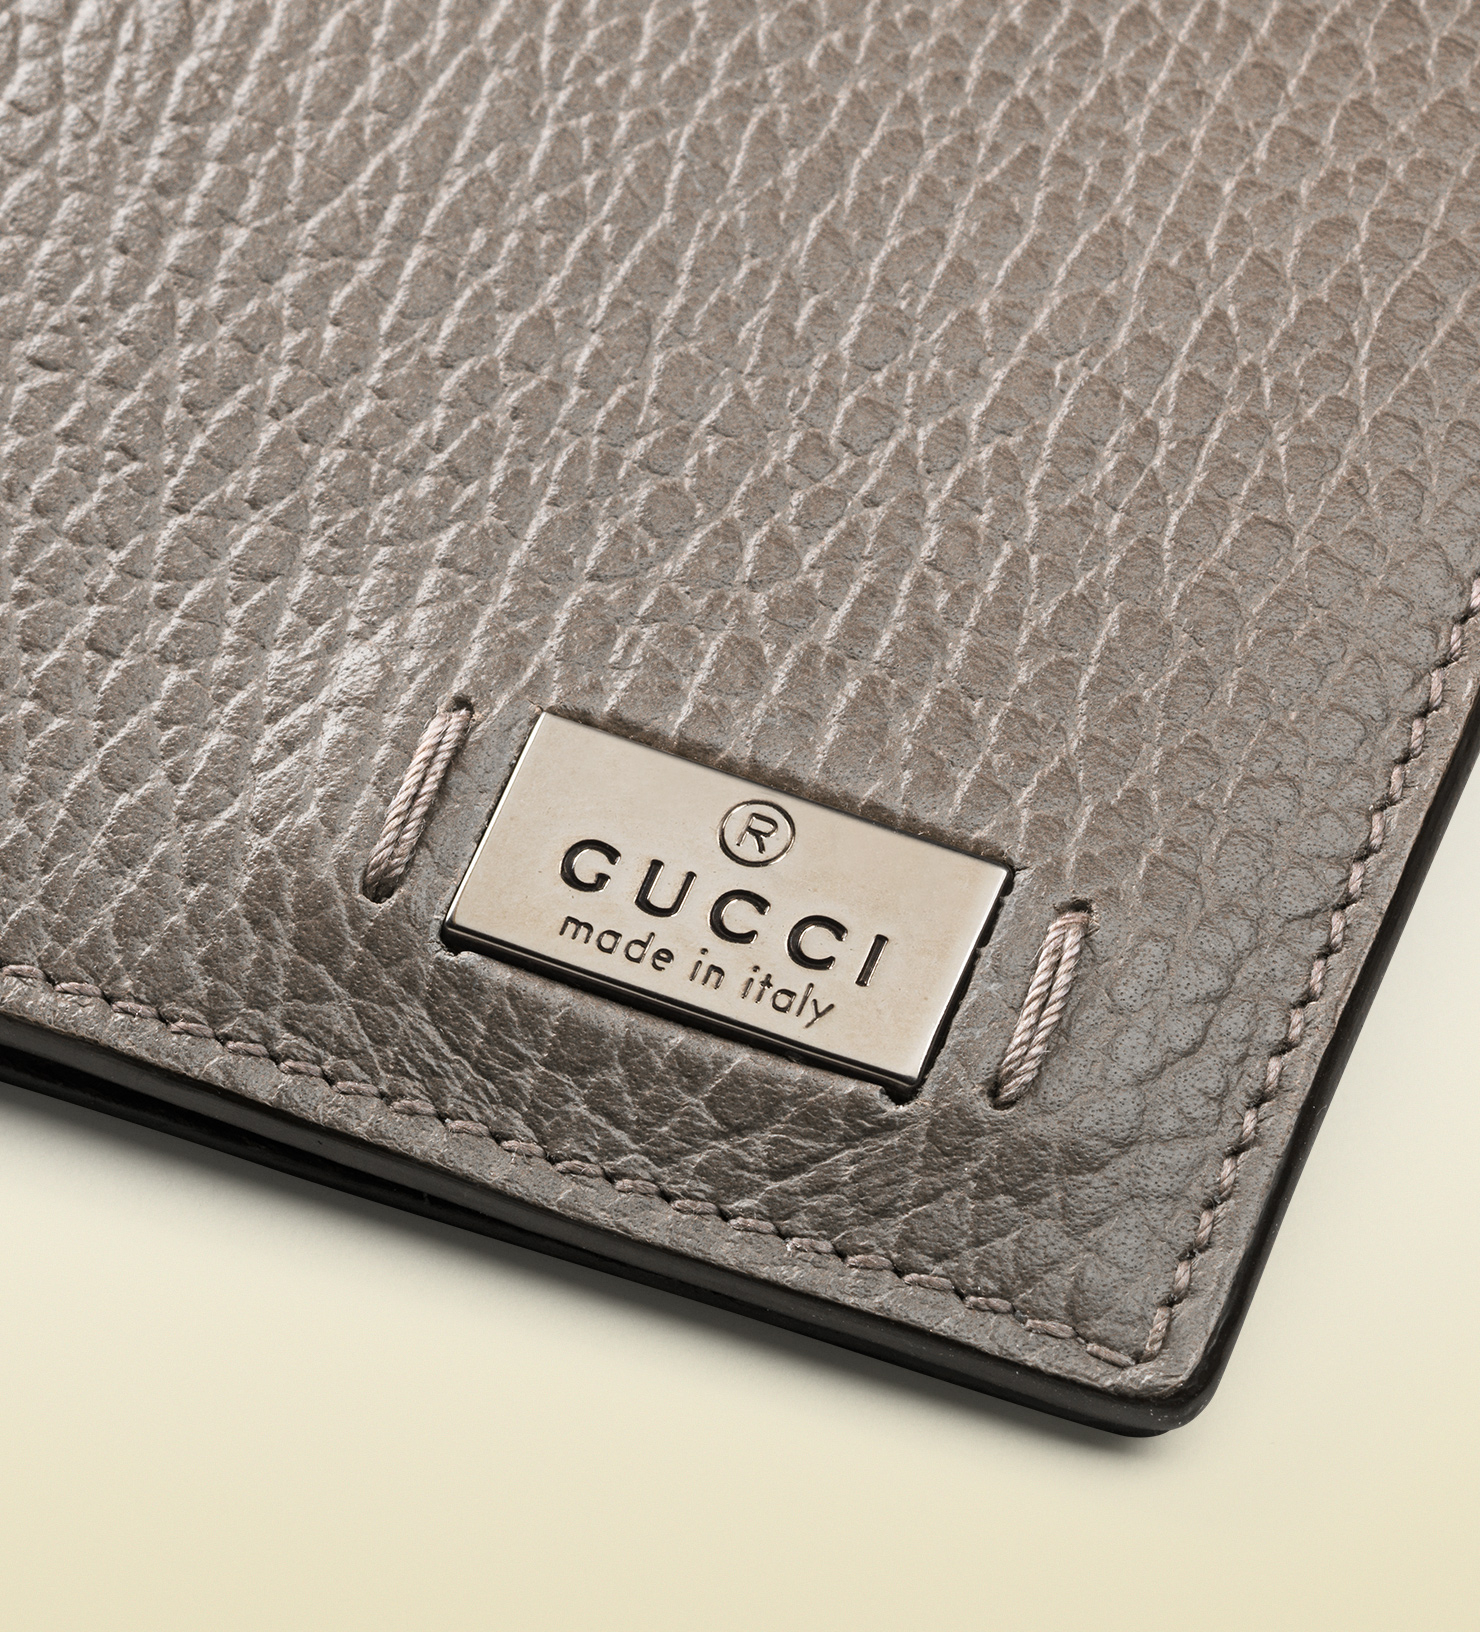 Lyst - Gucci Metal Tag Leather Bi-fold Wallet in Gray for Men